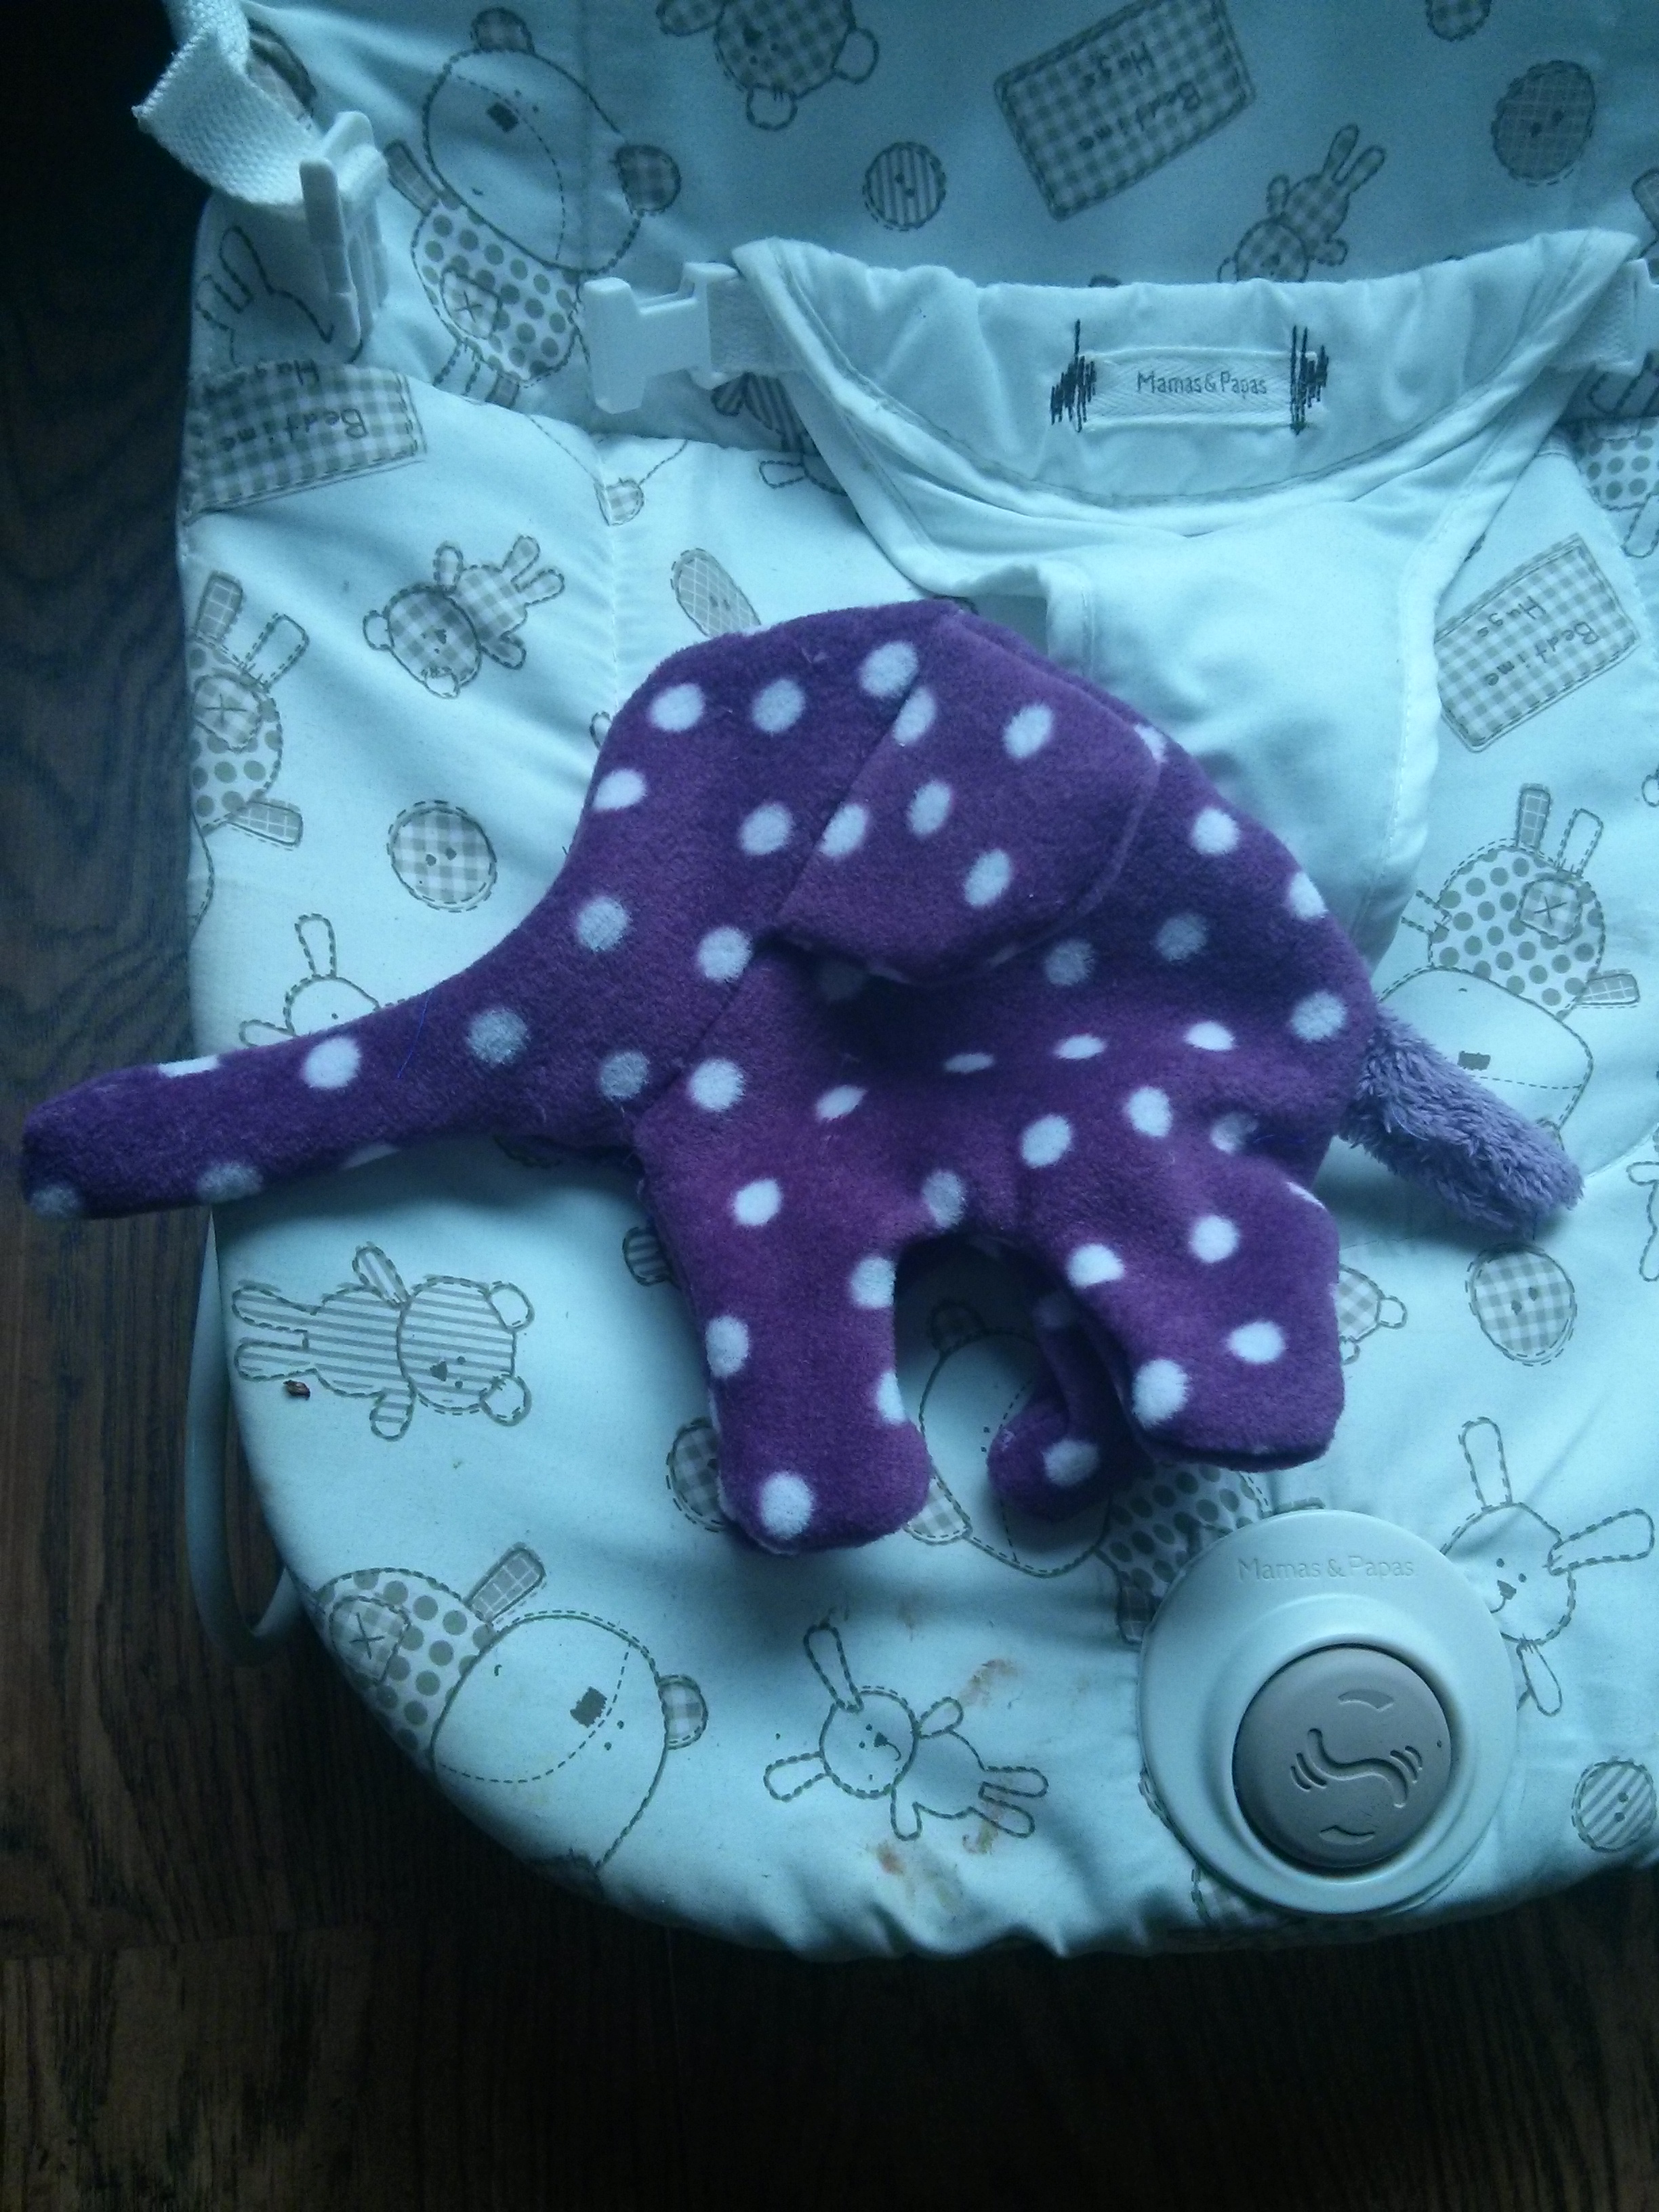 Ready for stuffing - From Onesie to Stuffed Toy Elephant